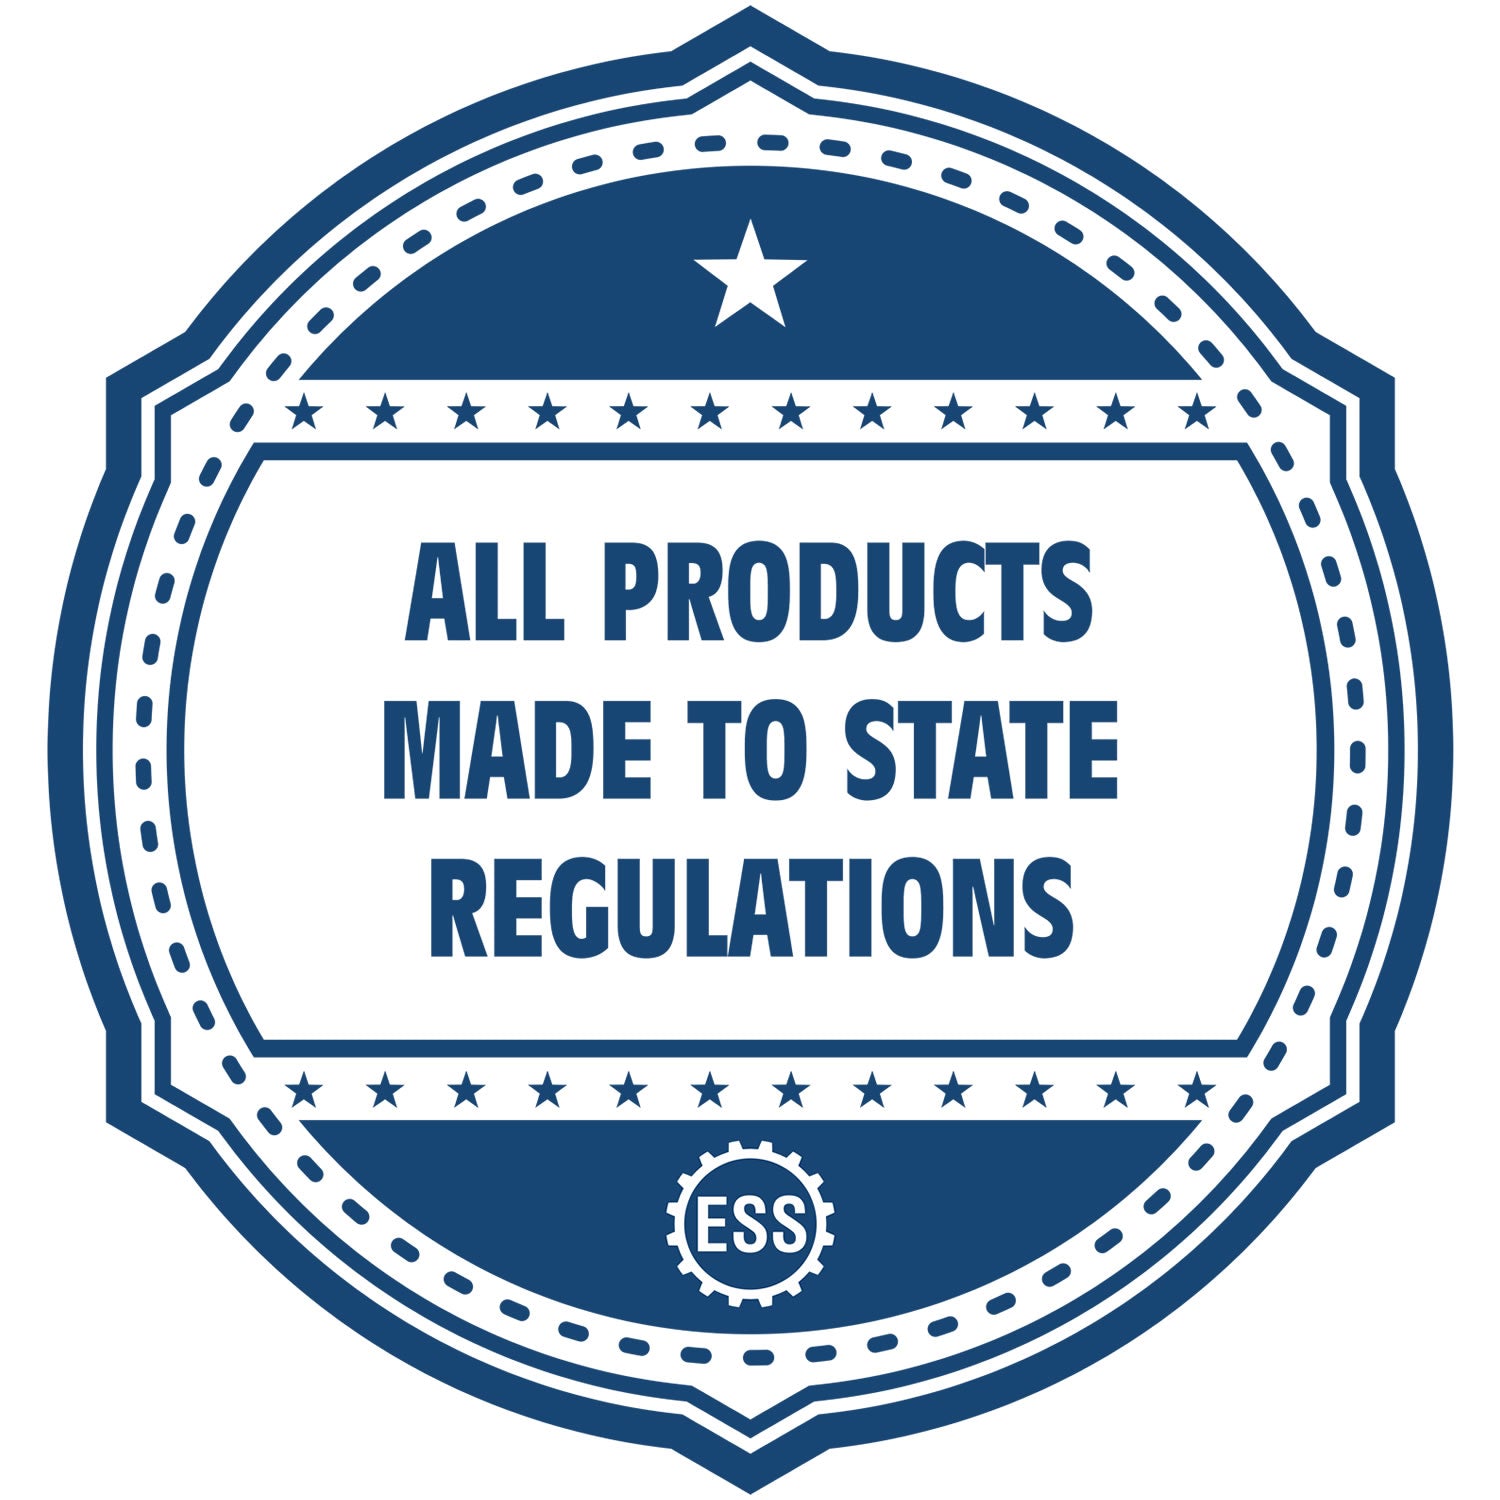 An icon or badge element for the Self-Inking South Dakota PE Stamp showing that this product is made in compliance with state regulations.